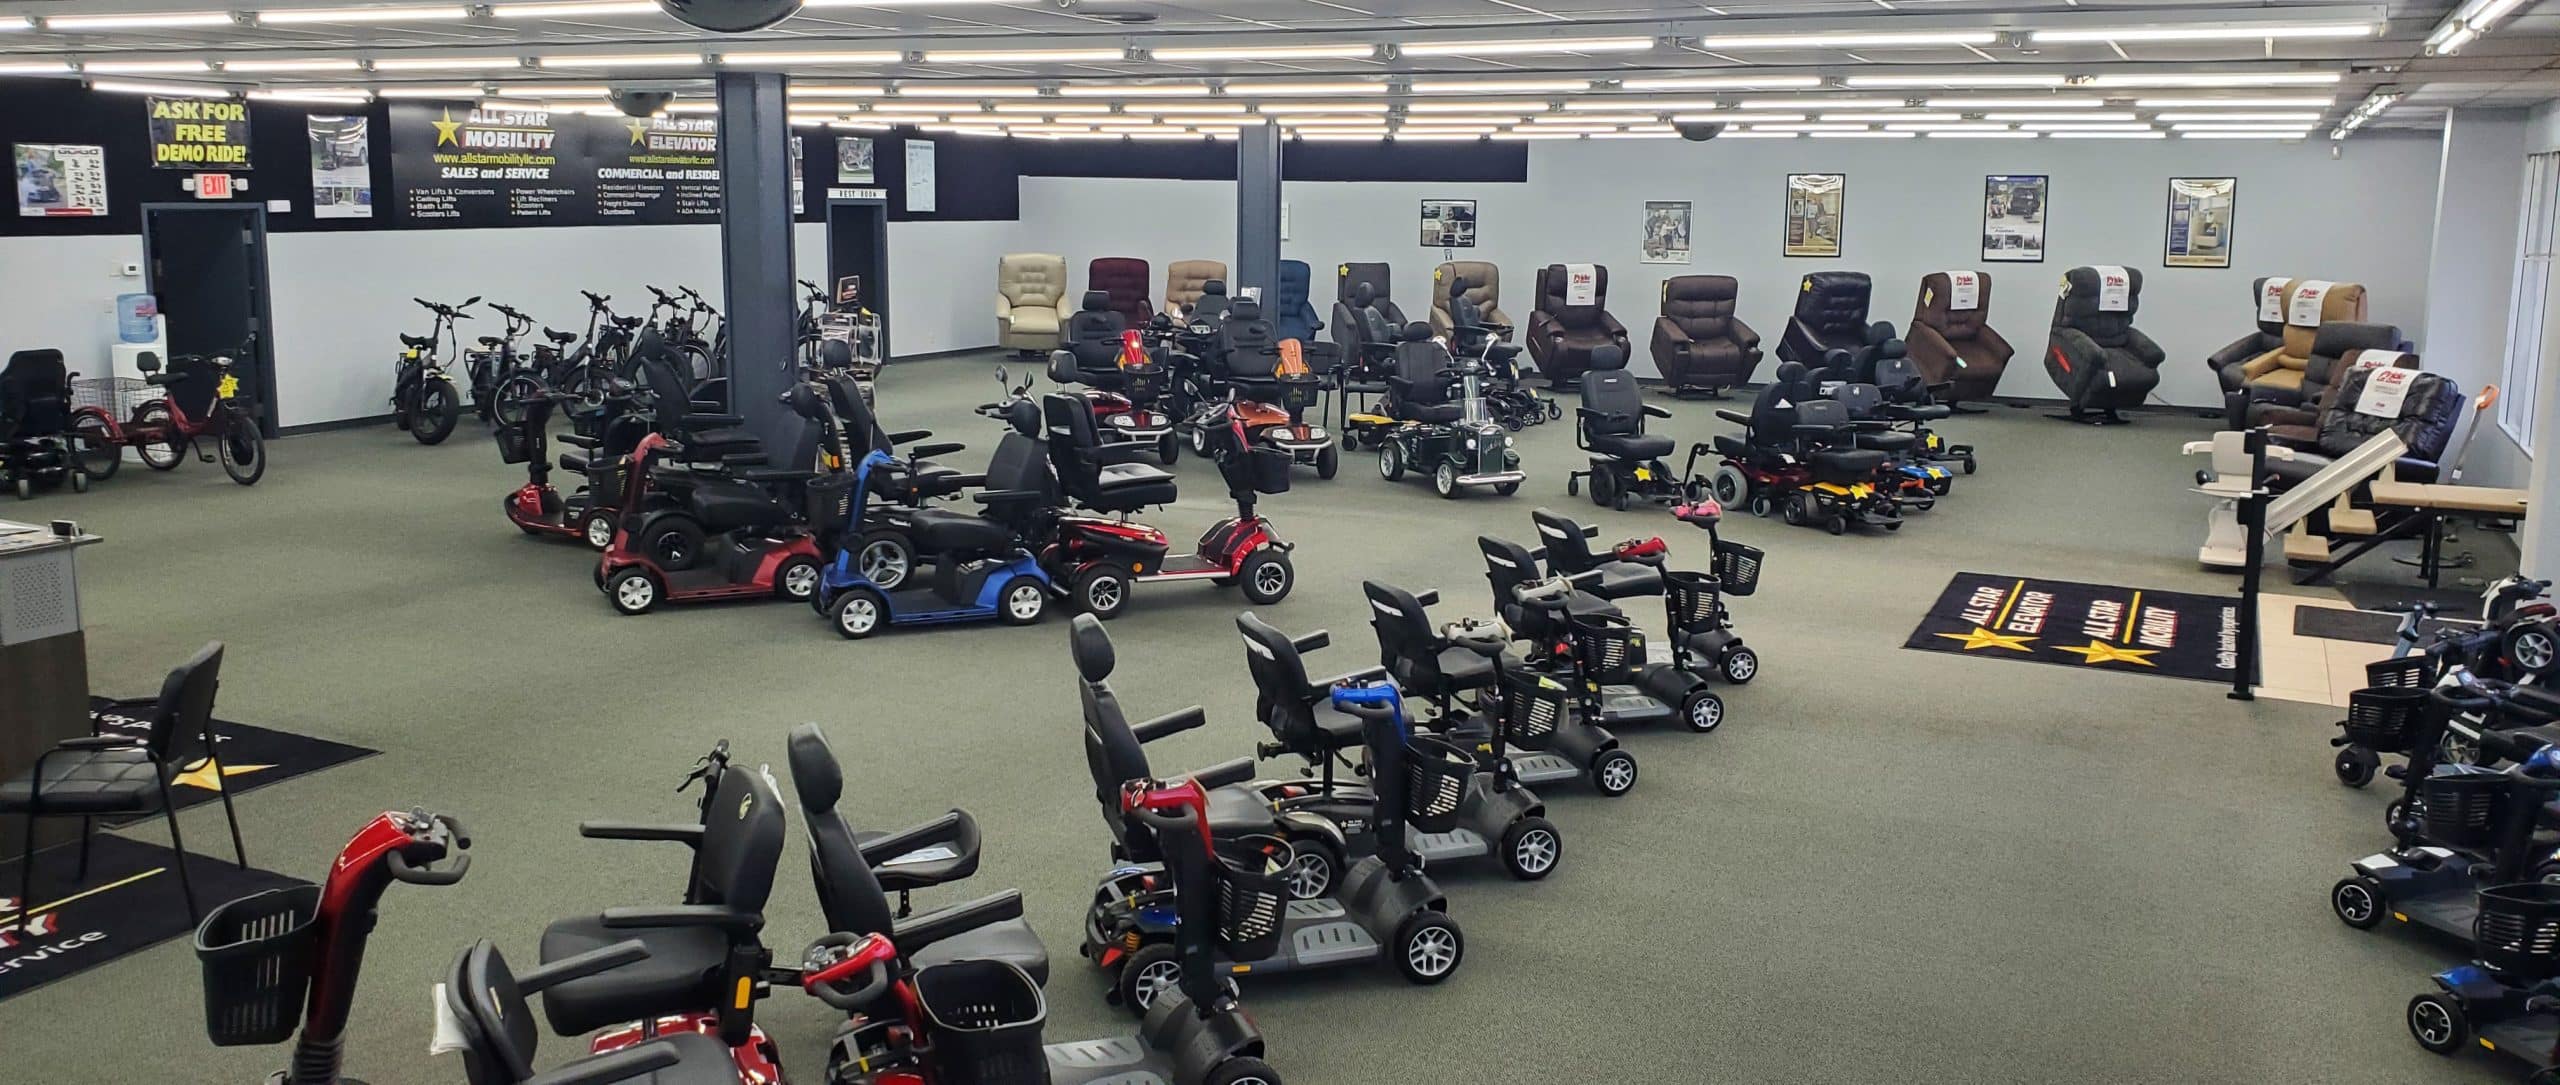 All Star Mobility, LLC - Eau Claire - Showroom